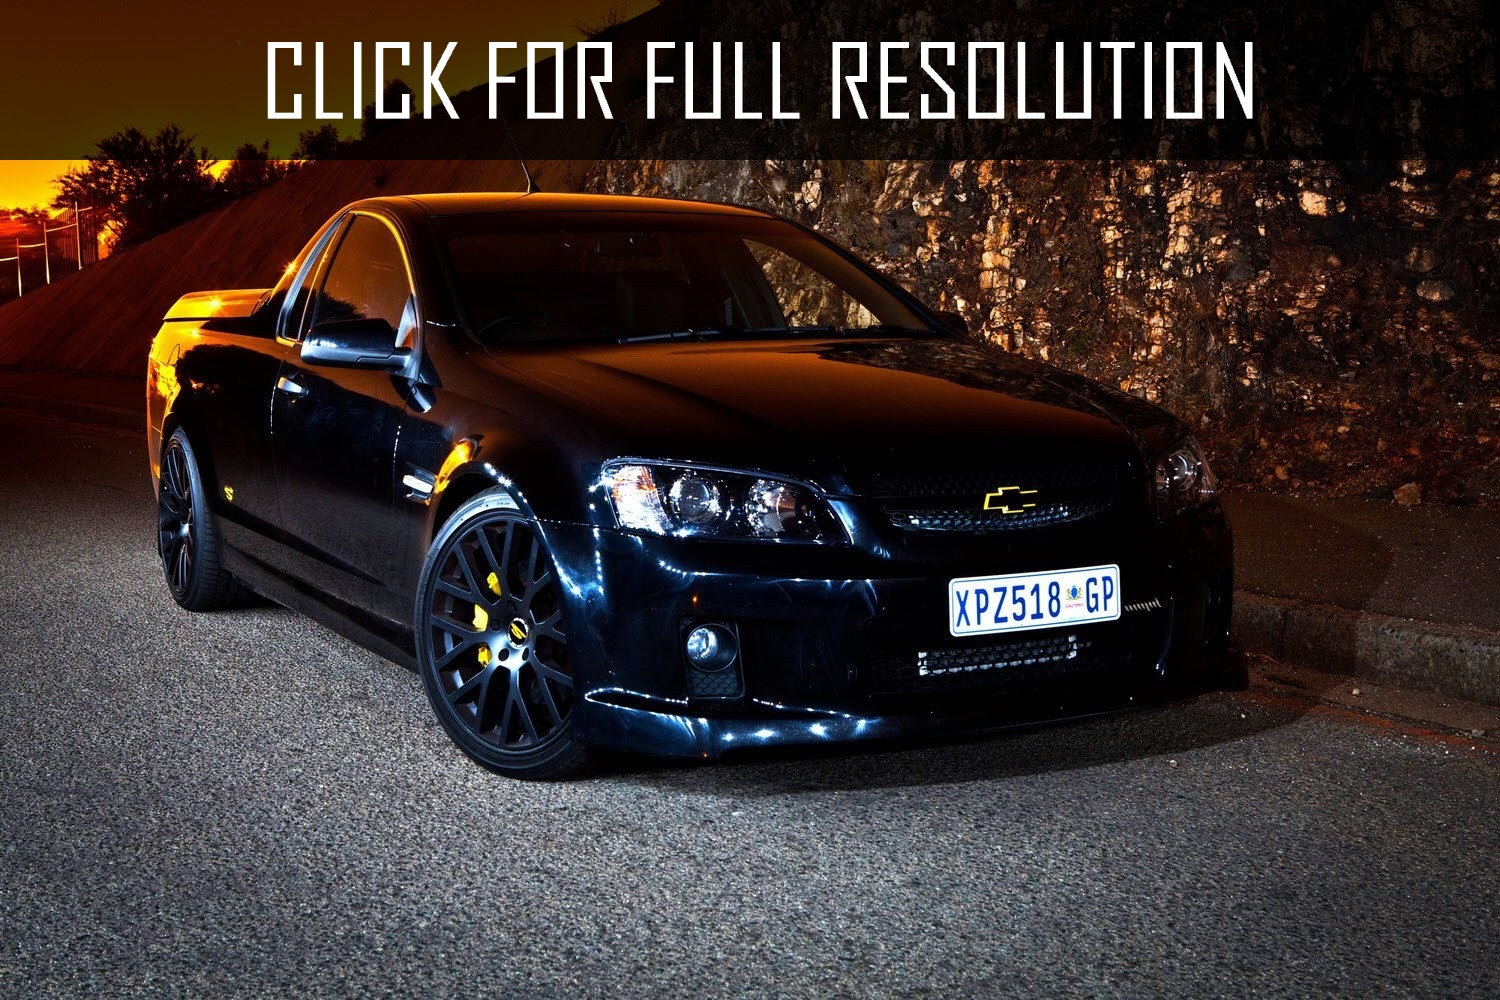 Chevrolet Ss Lumina V12 amazing photo gallery, some information and